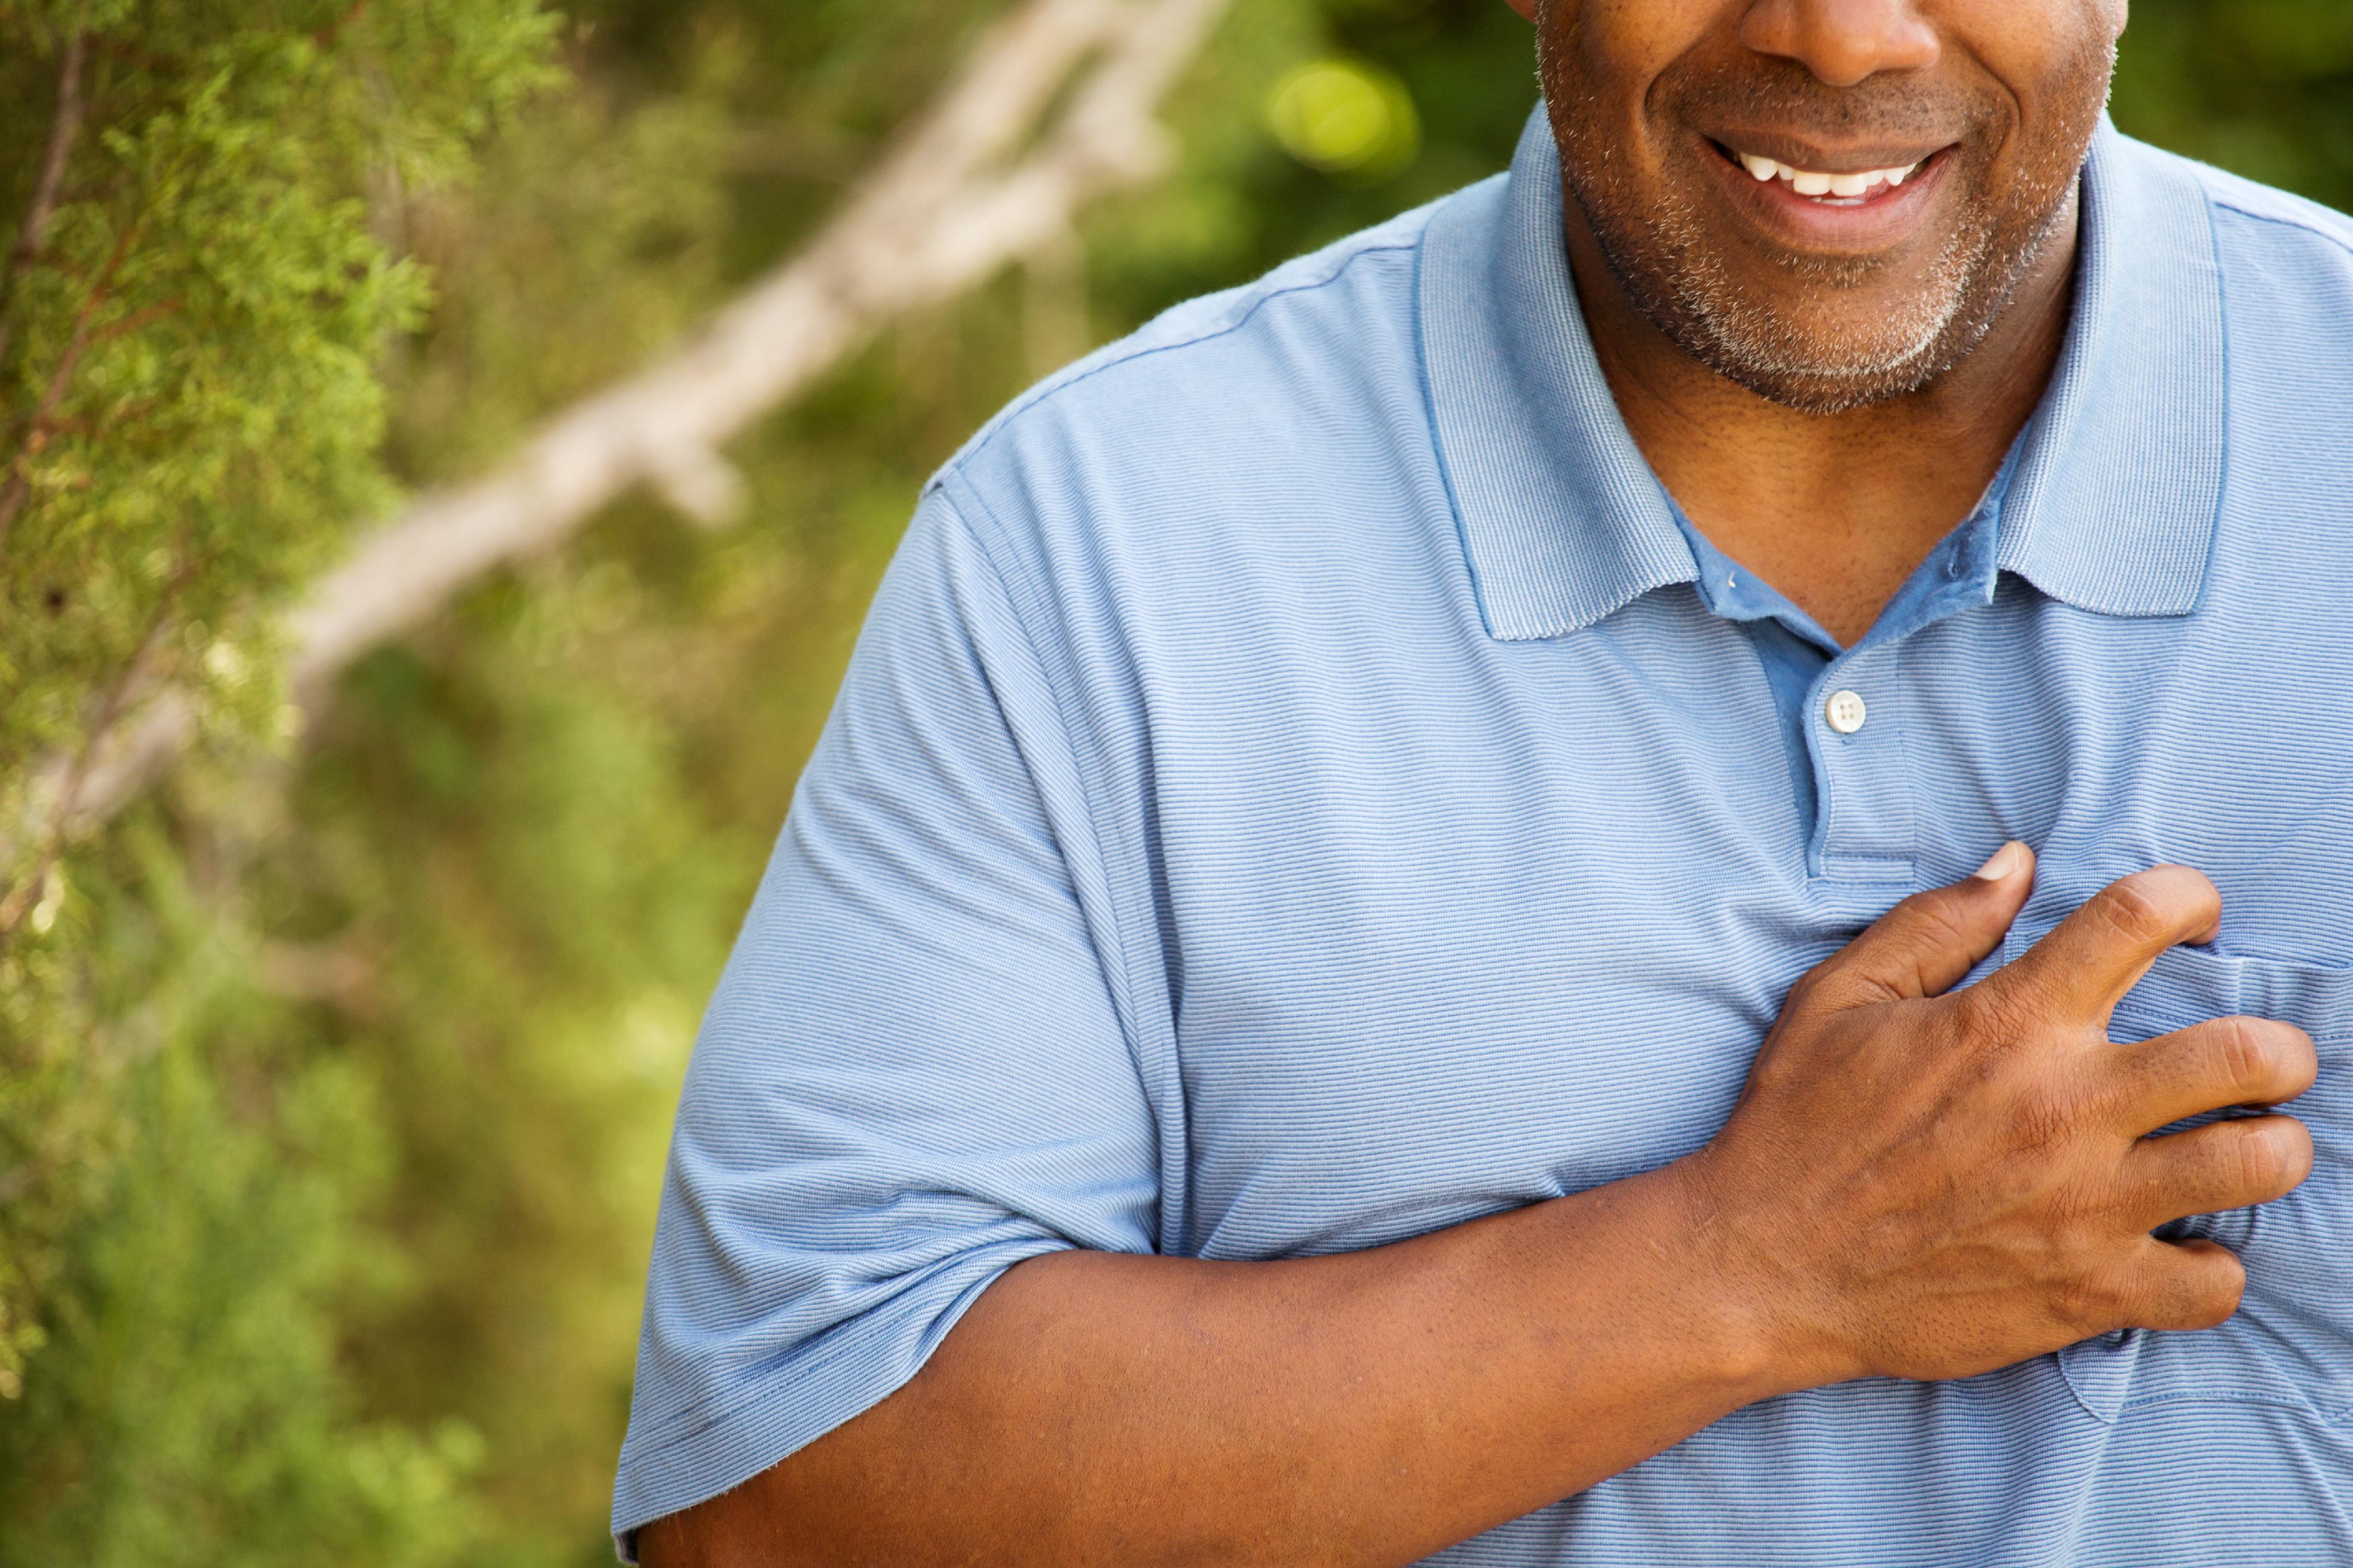 What are the Symptoms of Heart Failure and the Treatment for Heart Failure?